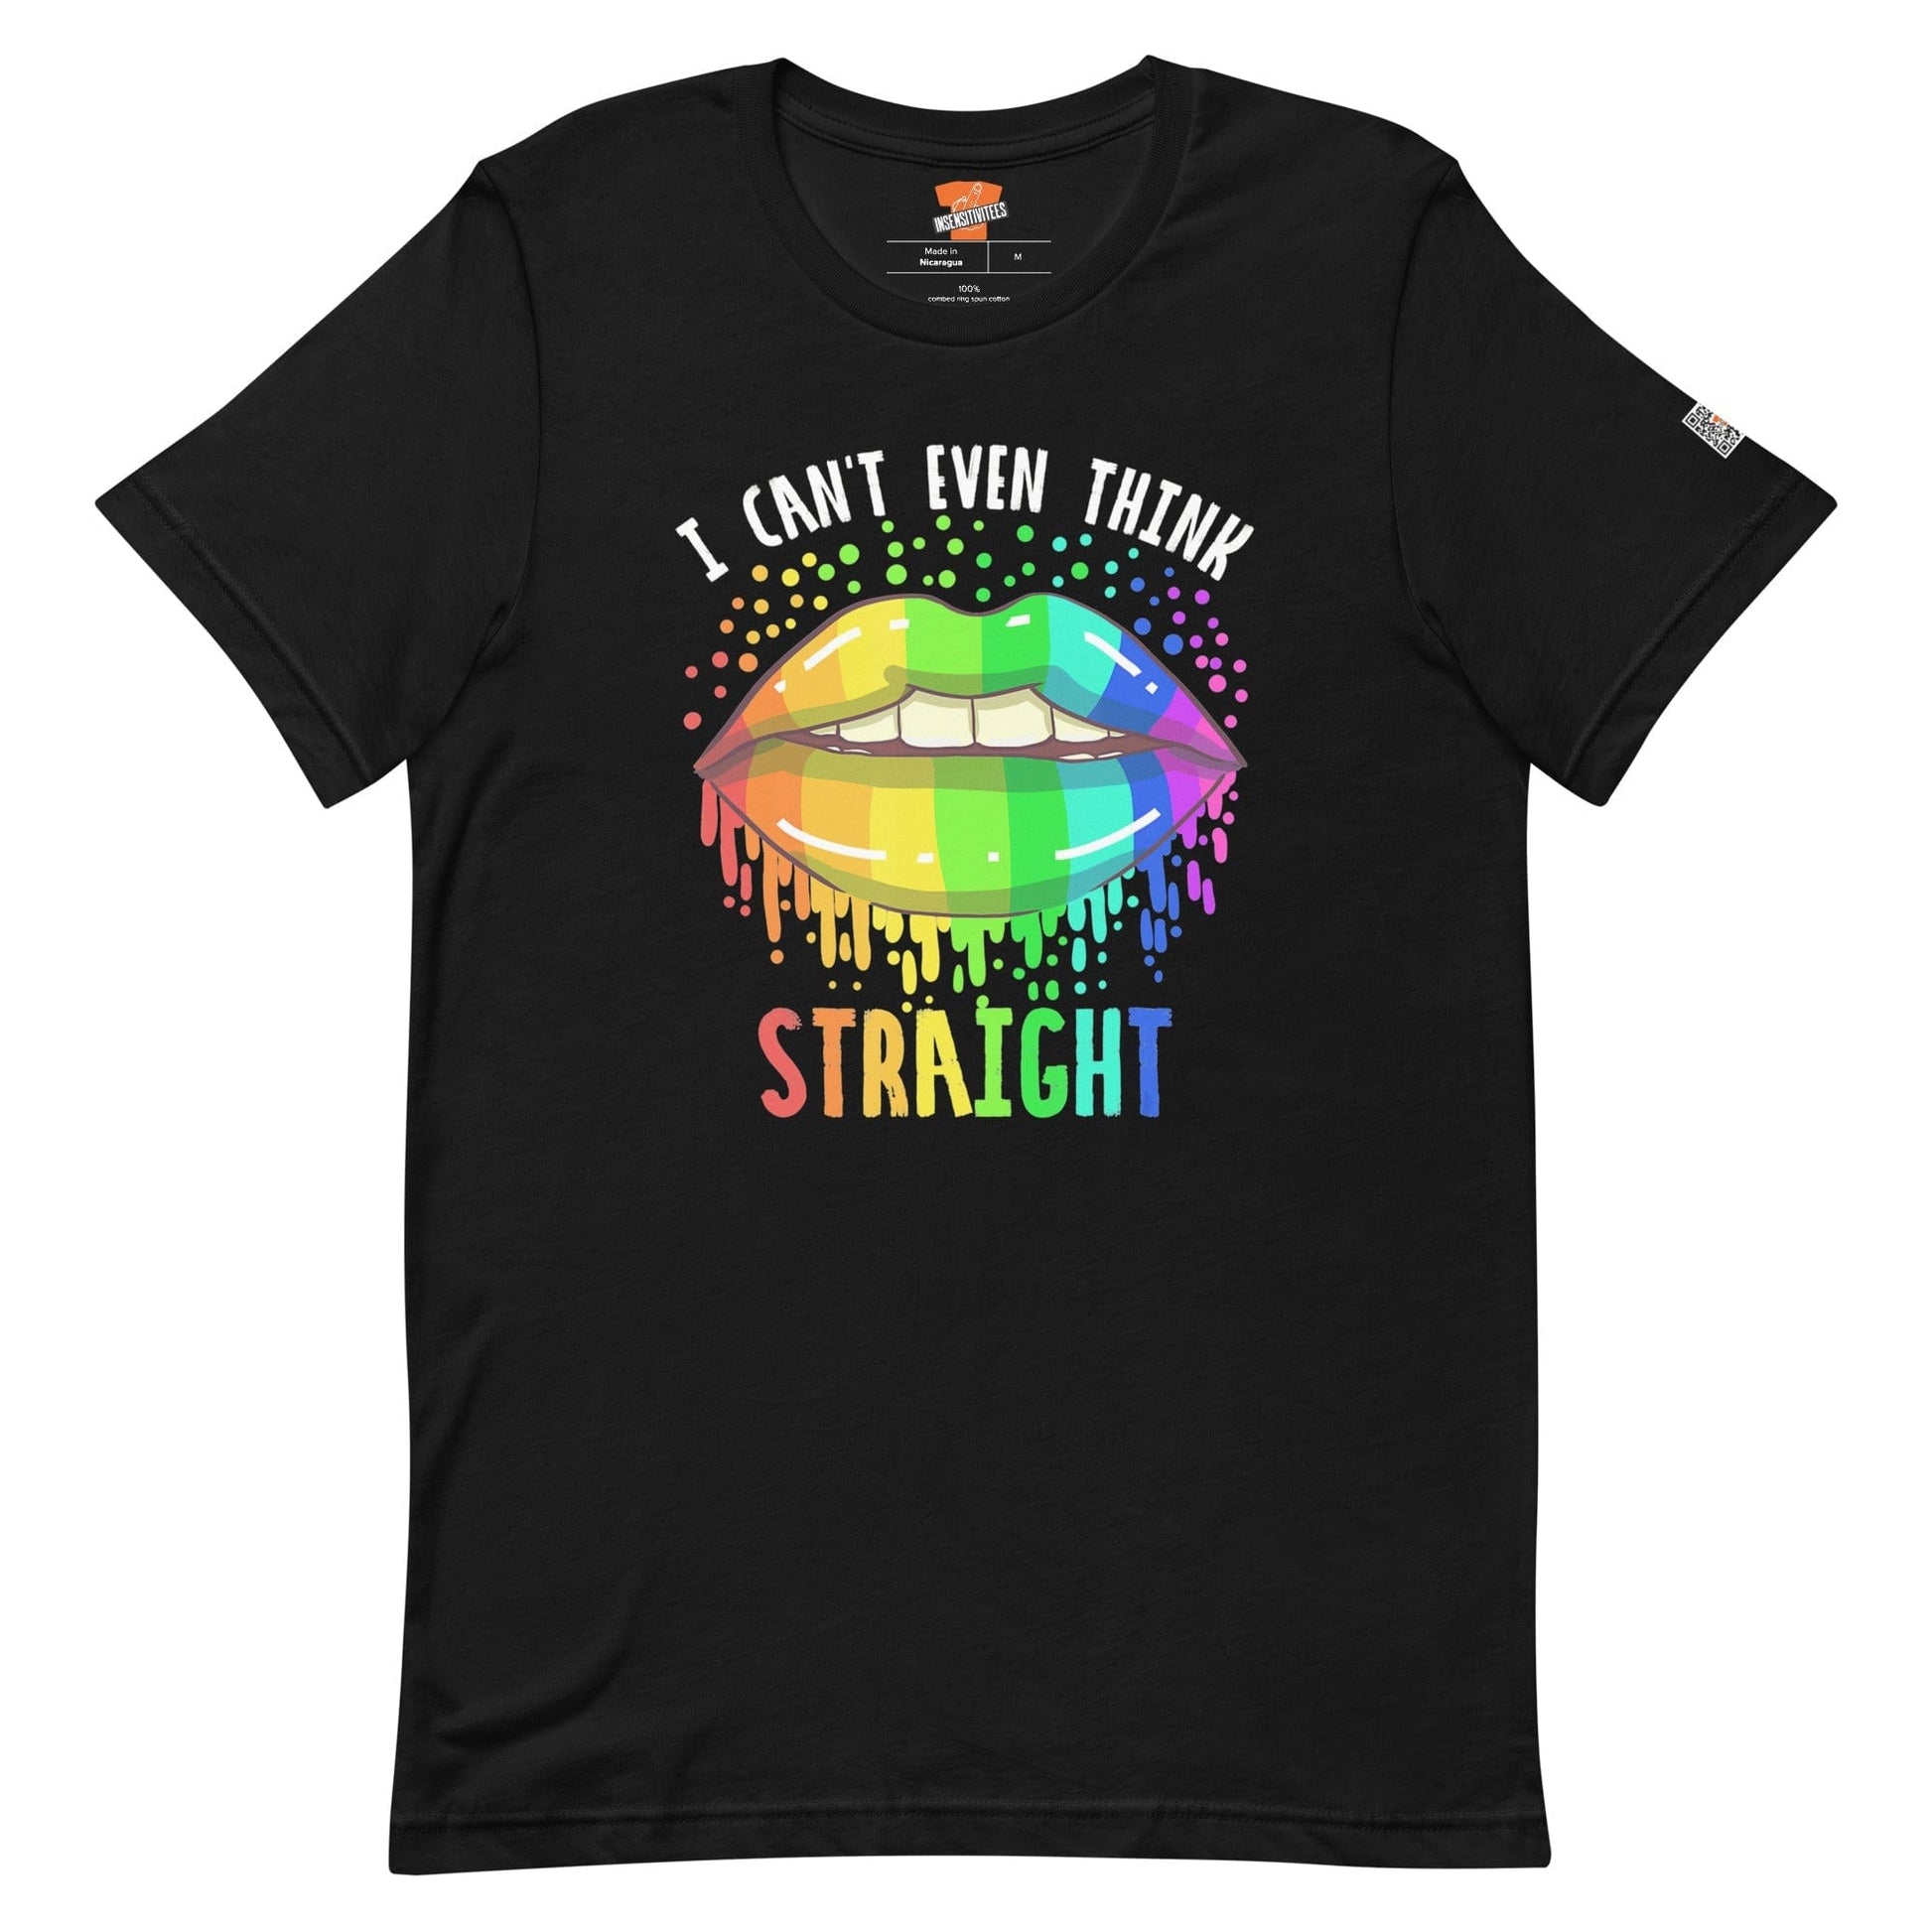 InsensitiviTees™️ Can't Think Straight Limited Edition Unisex T-shirt